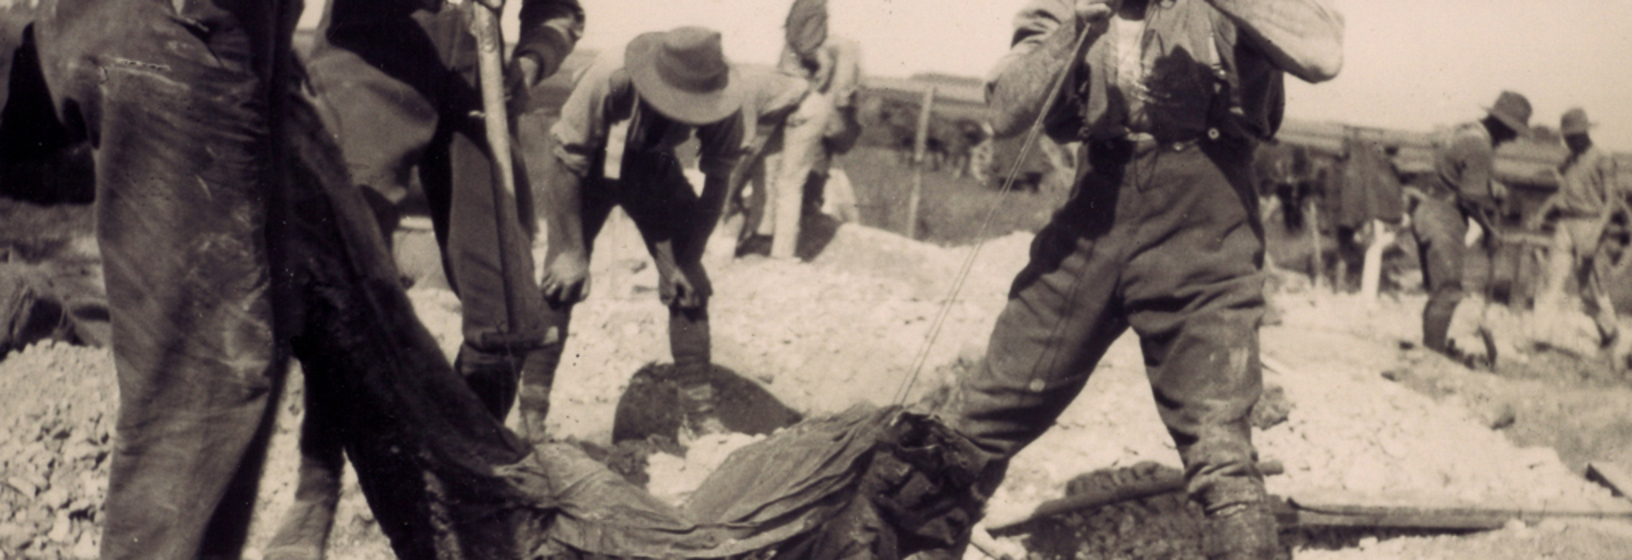 Men lifting a body wrapped in hessian out of a grave